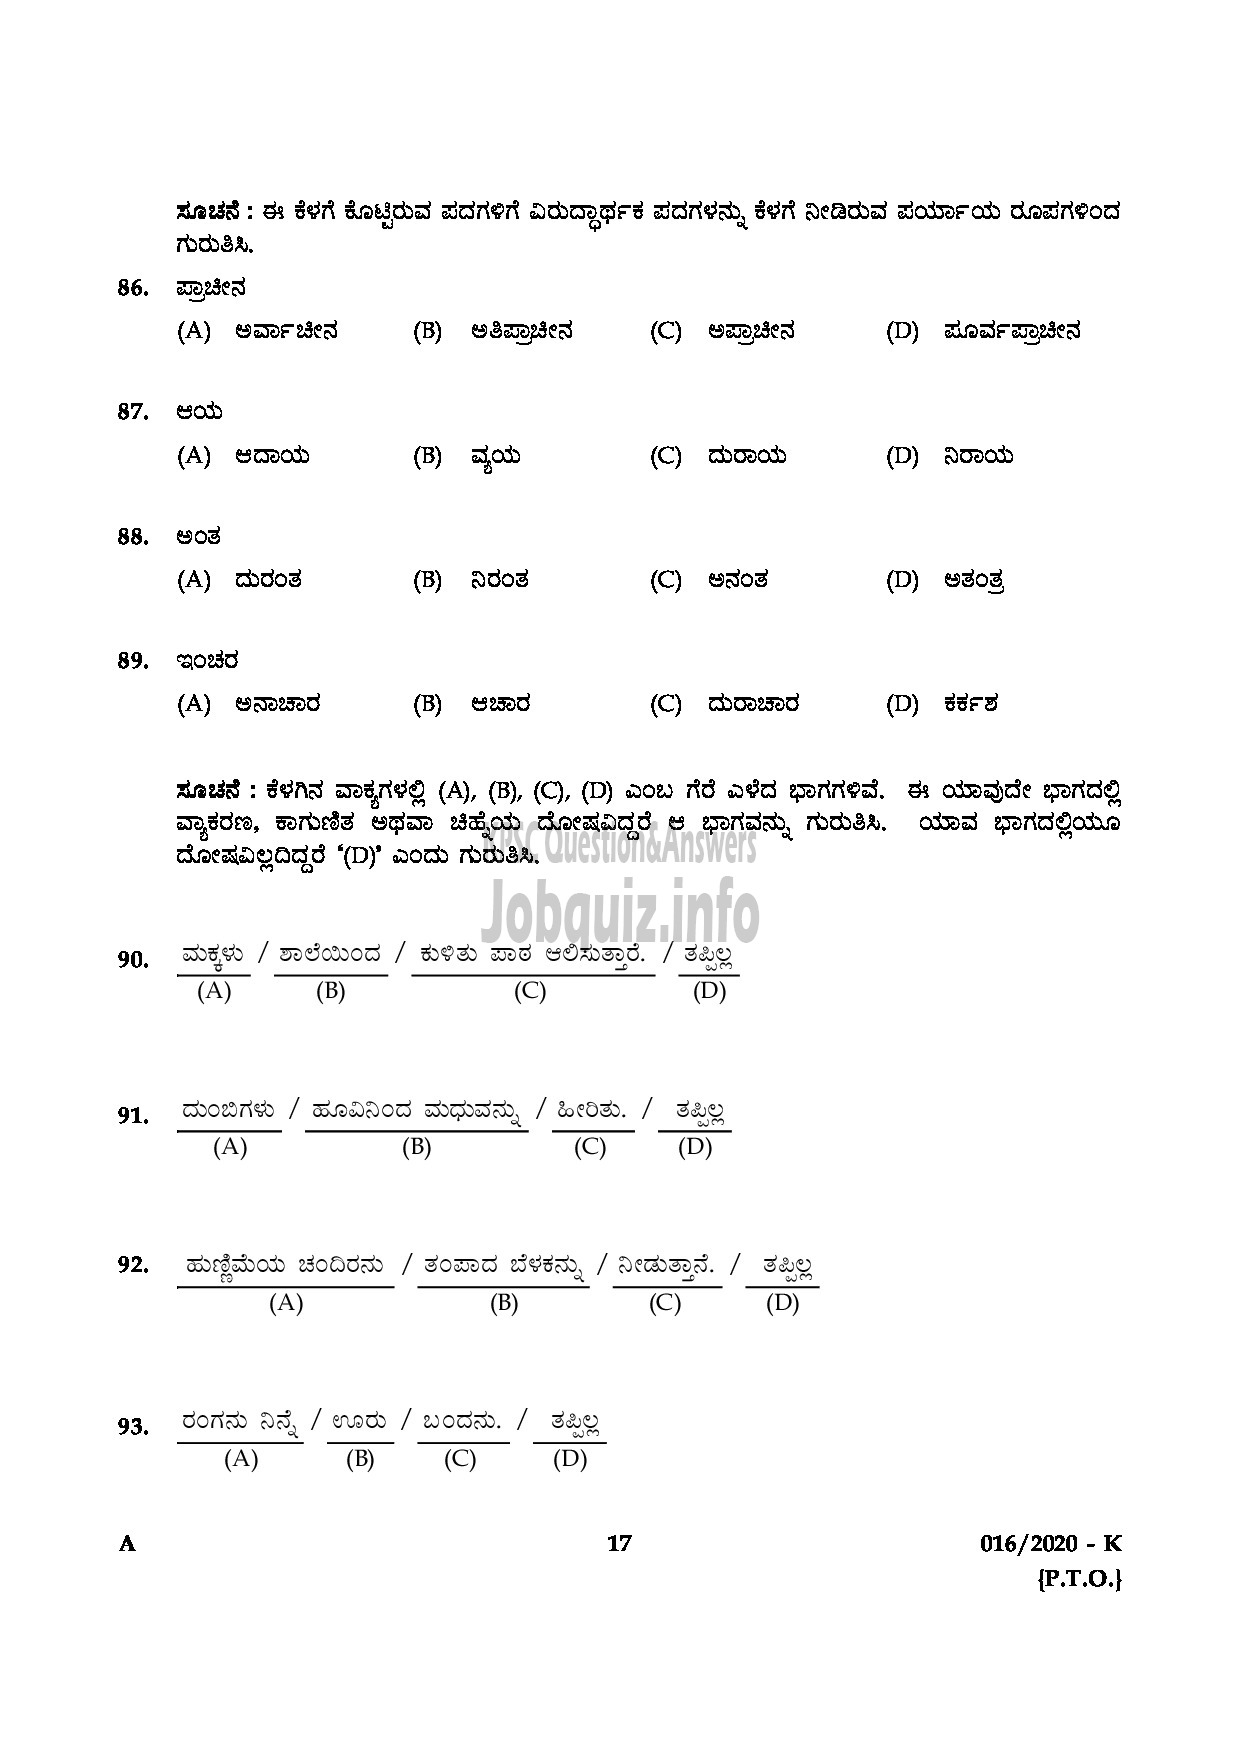 Kerala PSC Question Paper - KAS OFFICER (JUNIOR TIME SCALE) TRAINEE KERALA ADMINISTRATIVE SERVICE ENGLISH / KANNADA-17